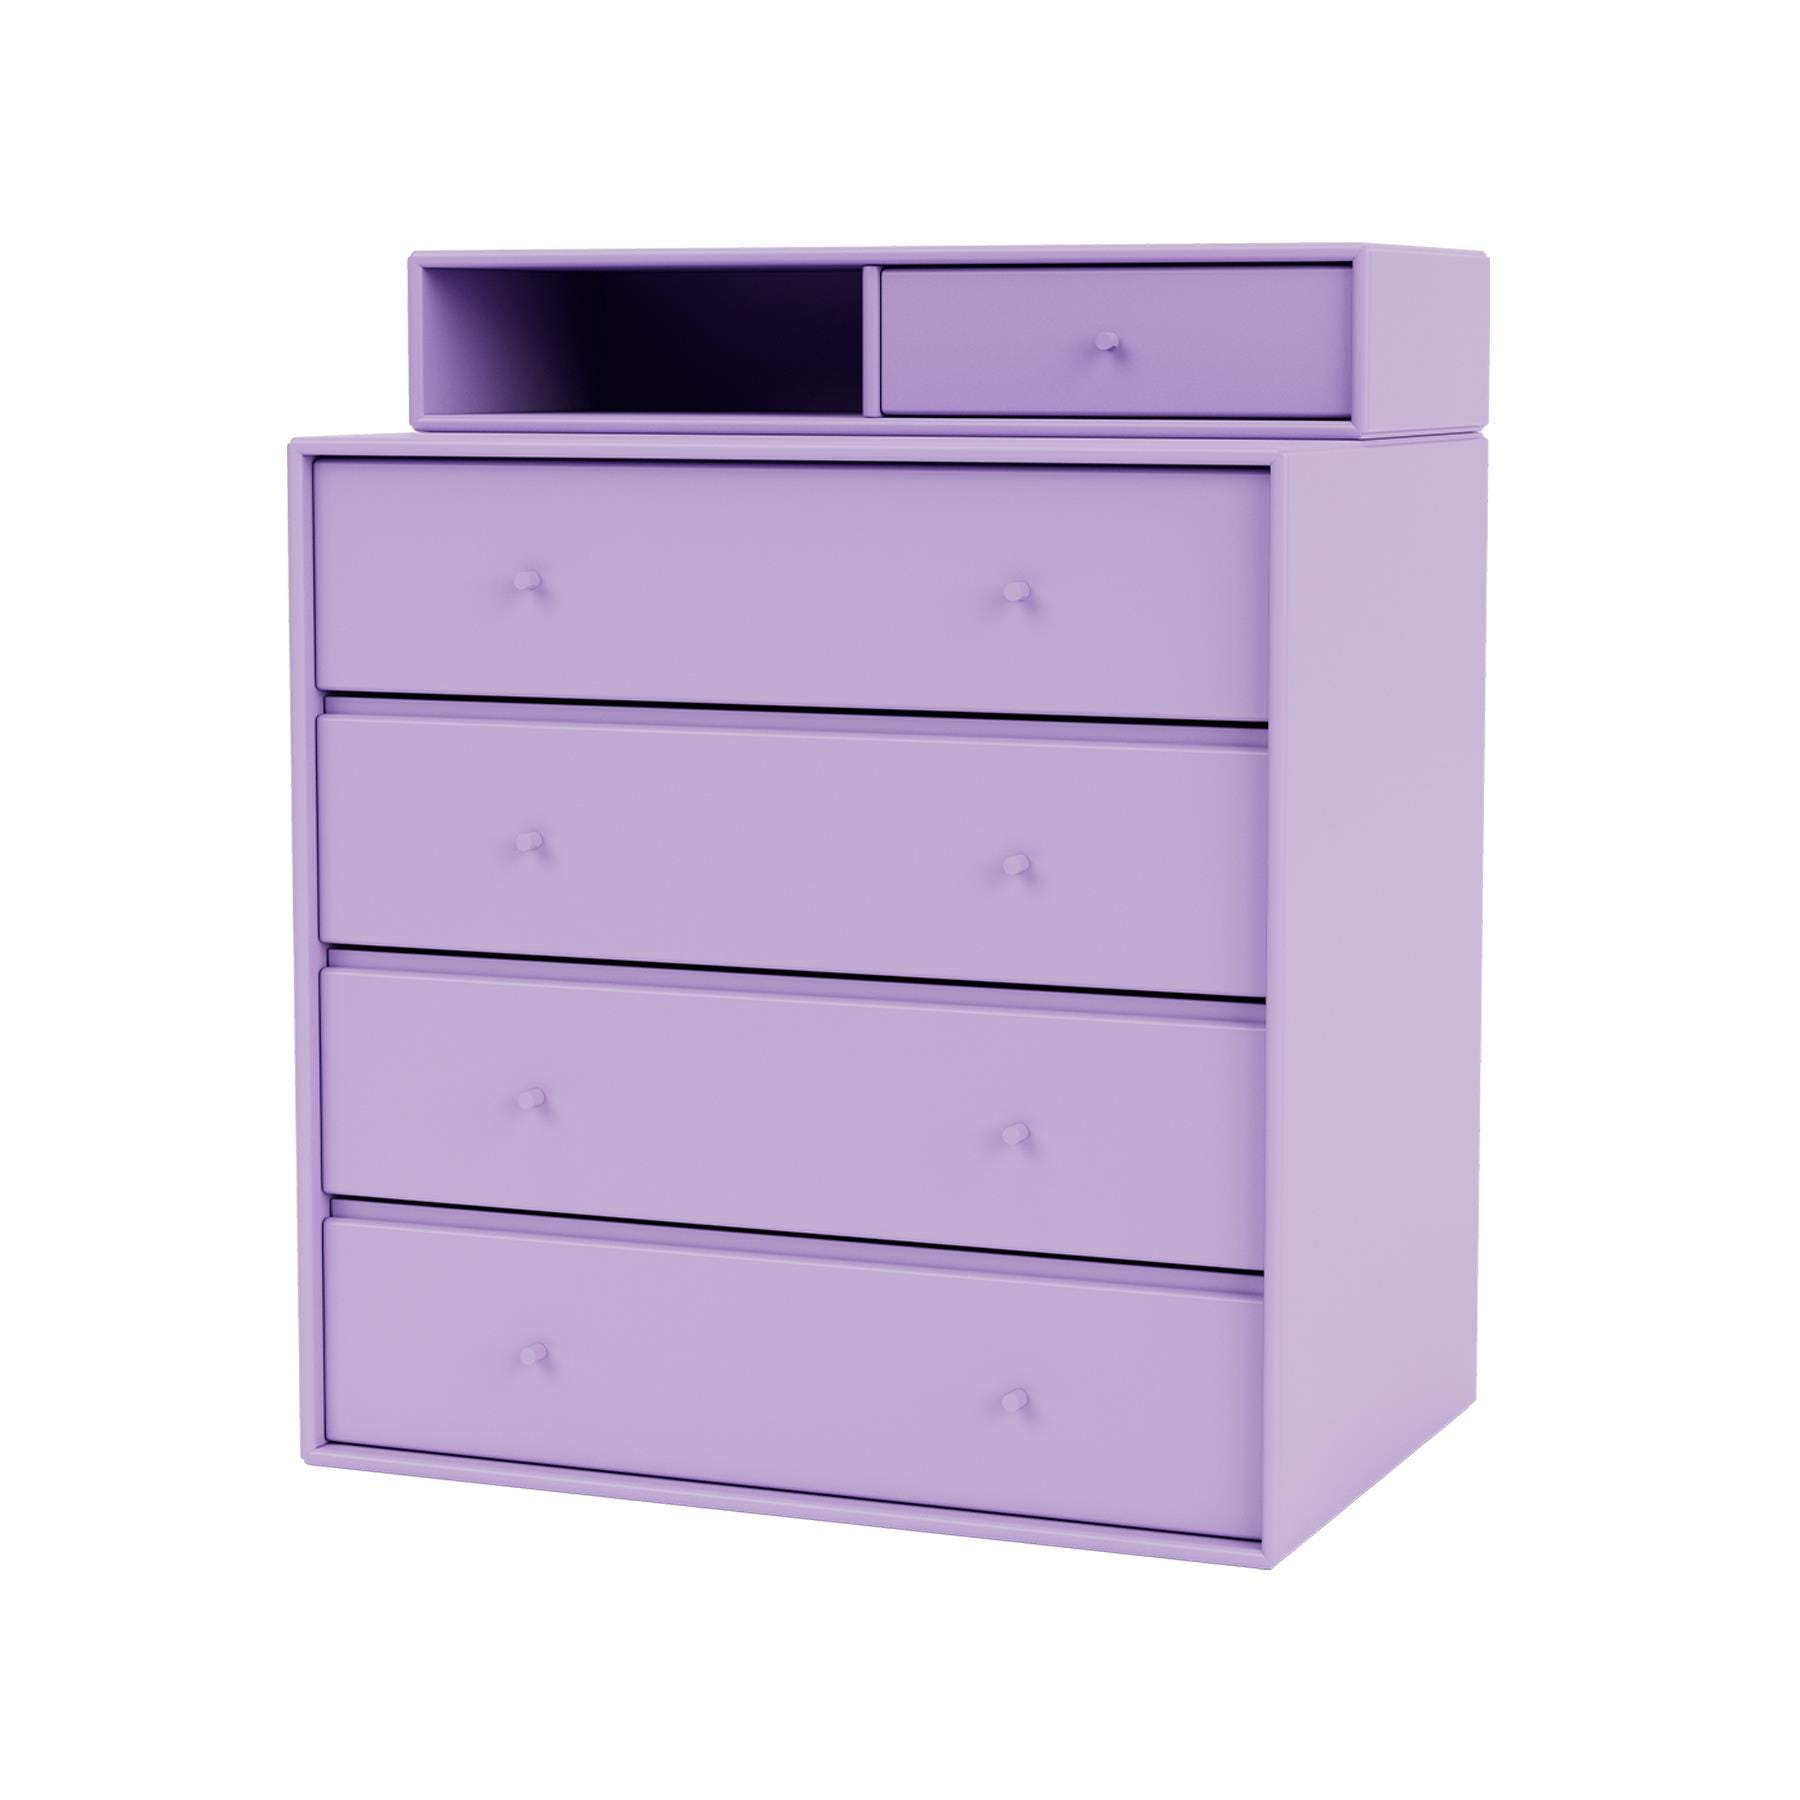 Montana Keep Chest Of Drawers Iris Wall Mounted Purple Designer Furniture From Holloways Of Ludlow